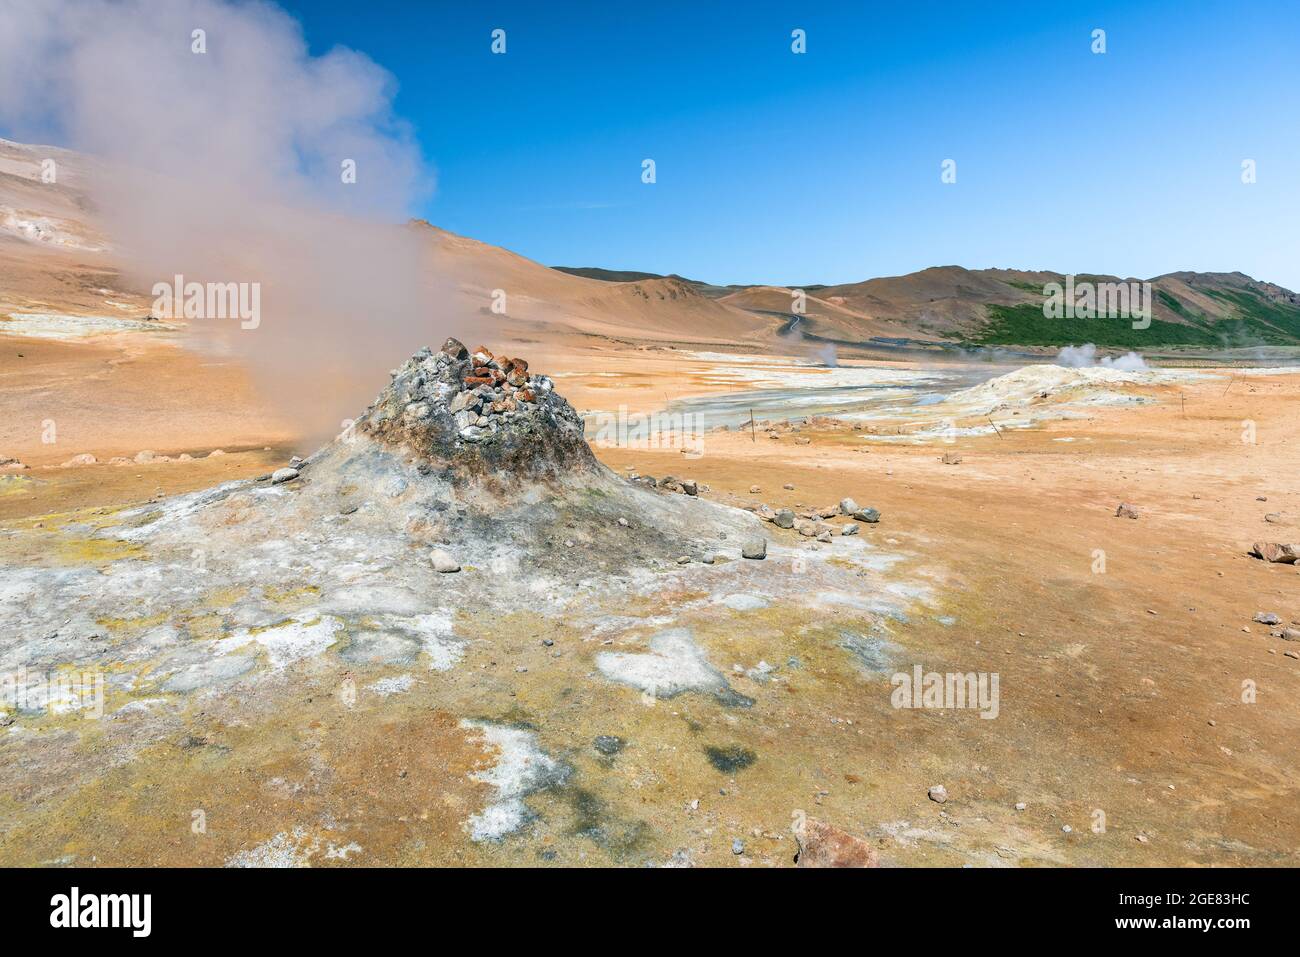 Fumarole in a geothermal area on a clear summer day. A winding road up a barren hill is visible in background. Stock Photo